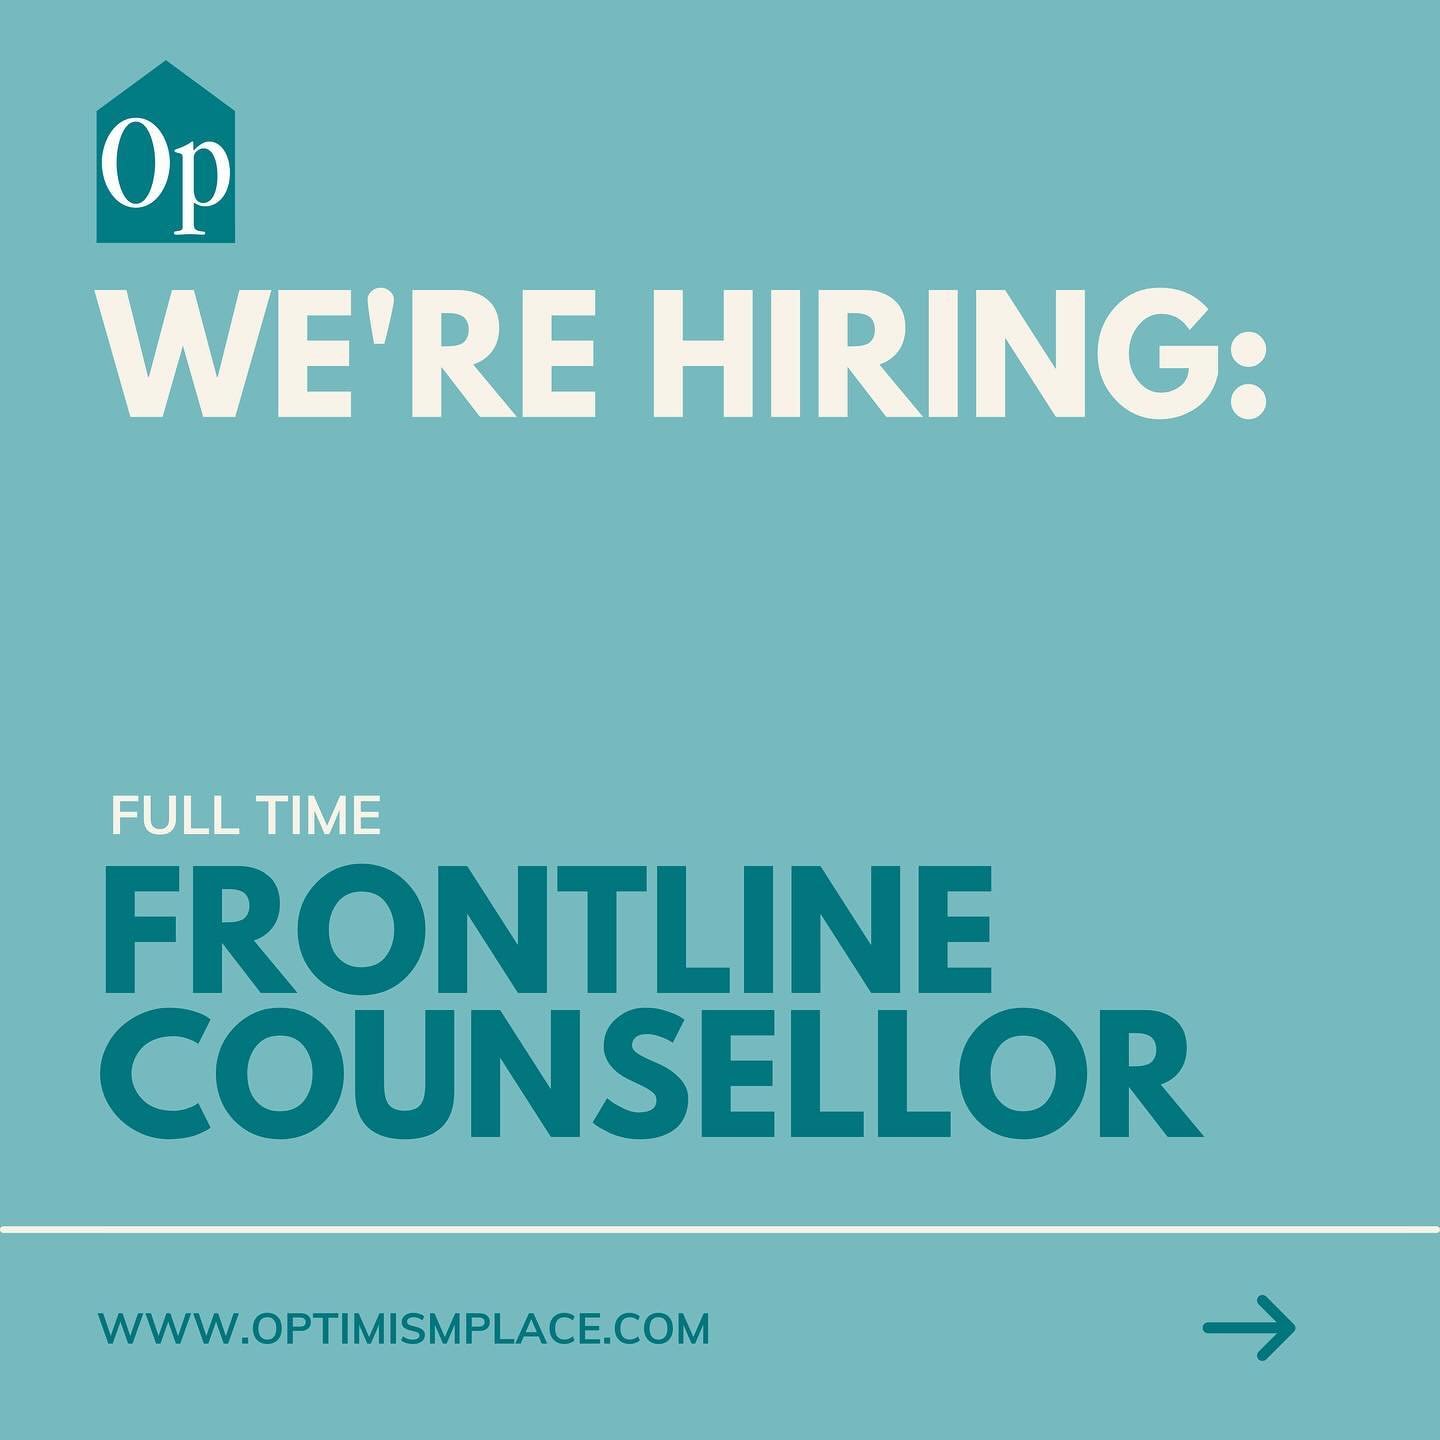 We&rsquo;re hiring: Full Time Frontline Counsellor! ⬇️ 

Join our team of dedicated feminists making a difference in the lives of women + children 💙 

Head to the link in our bio for the full job posting + description